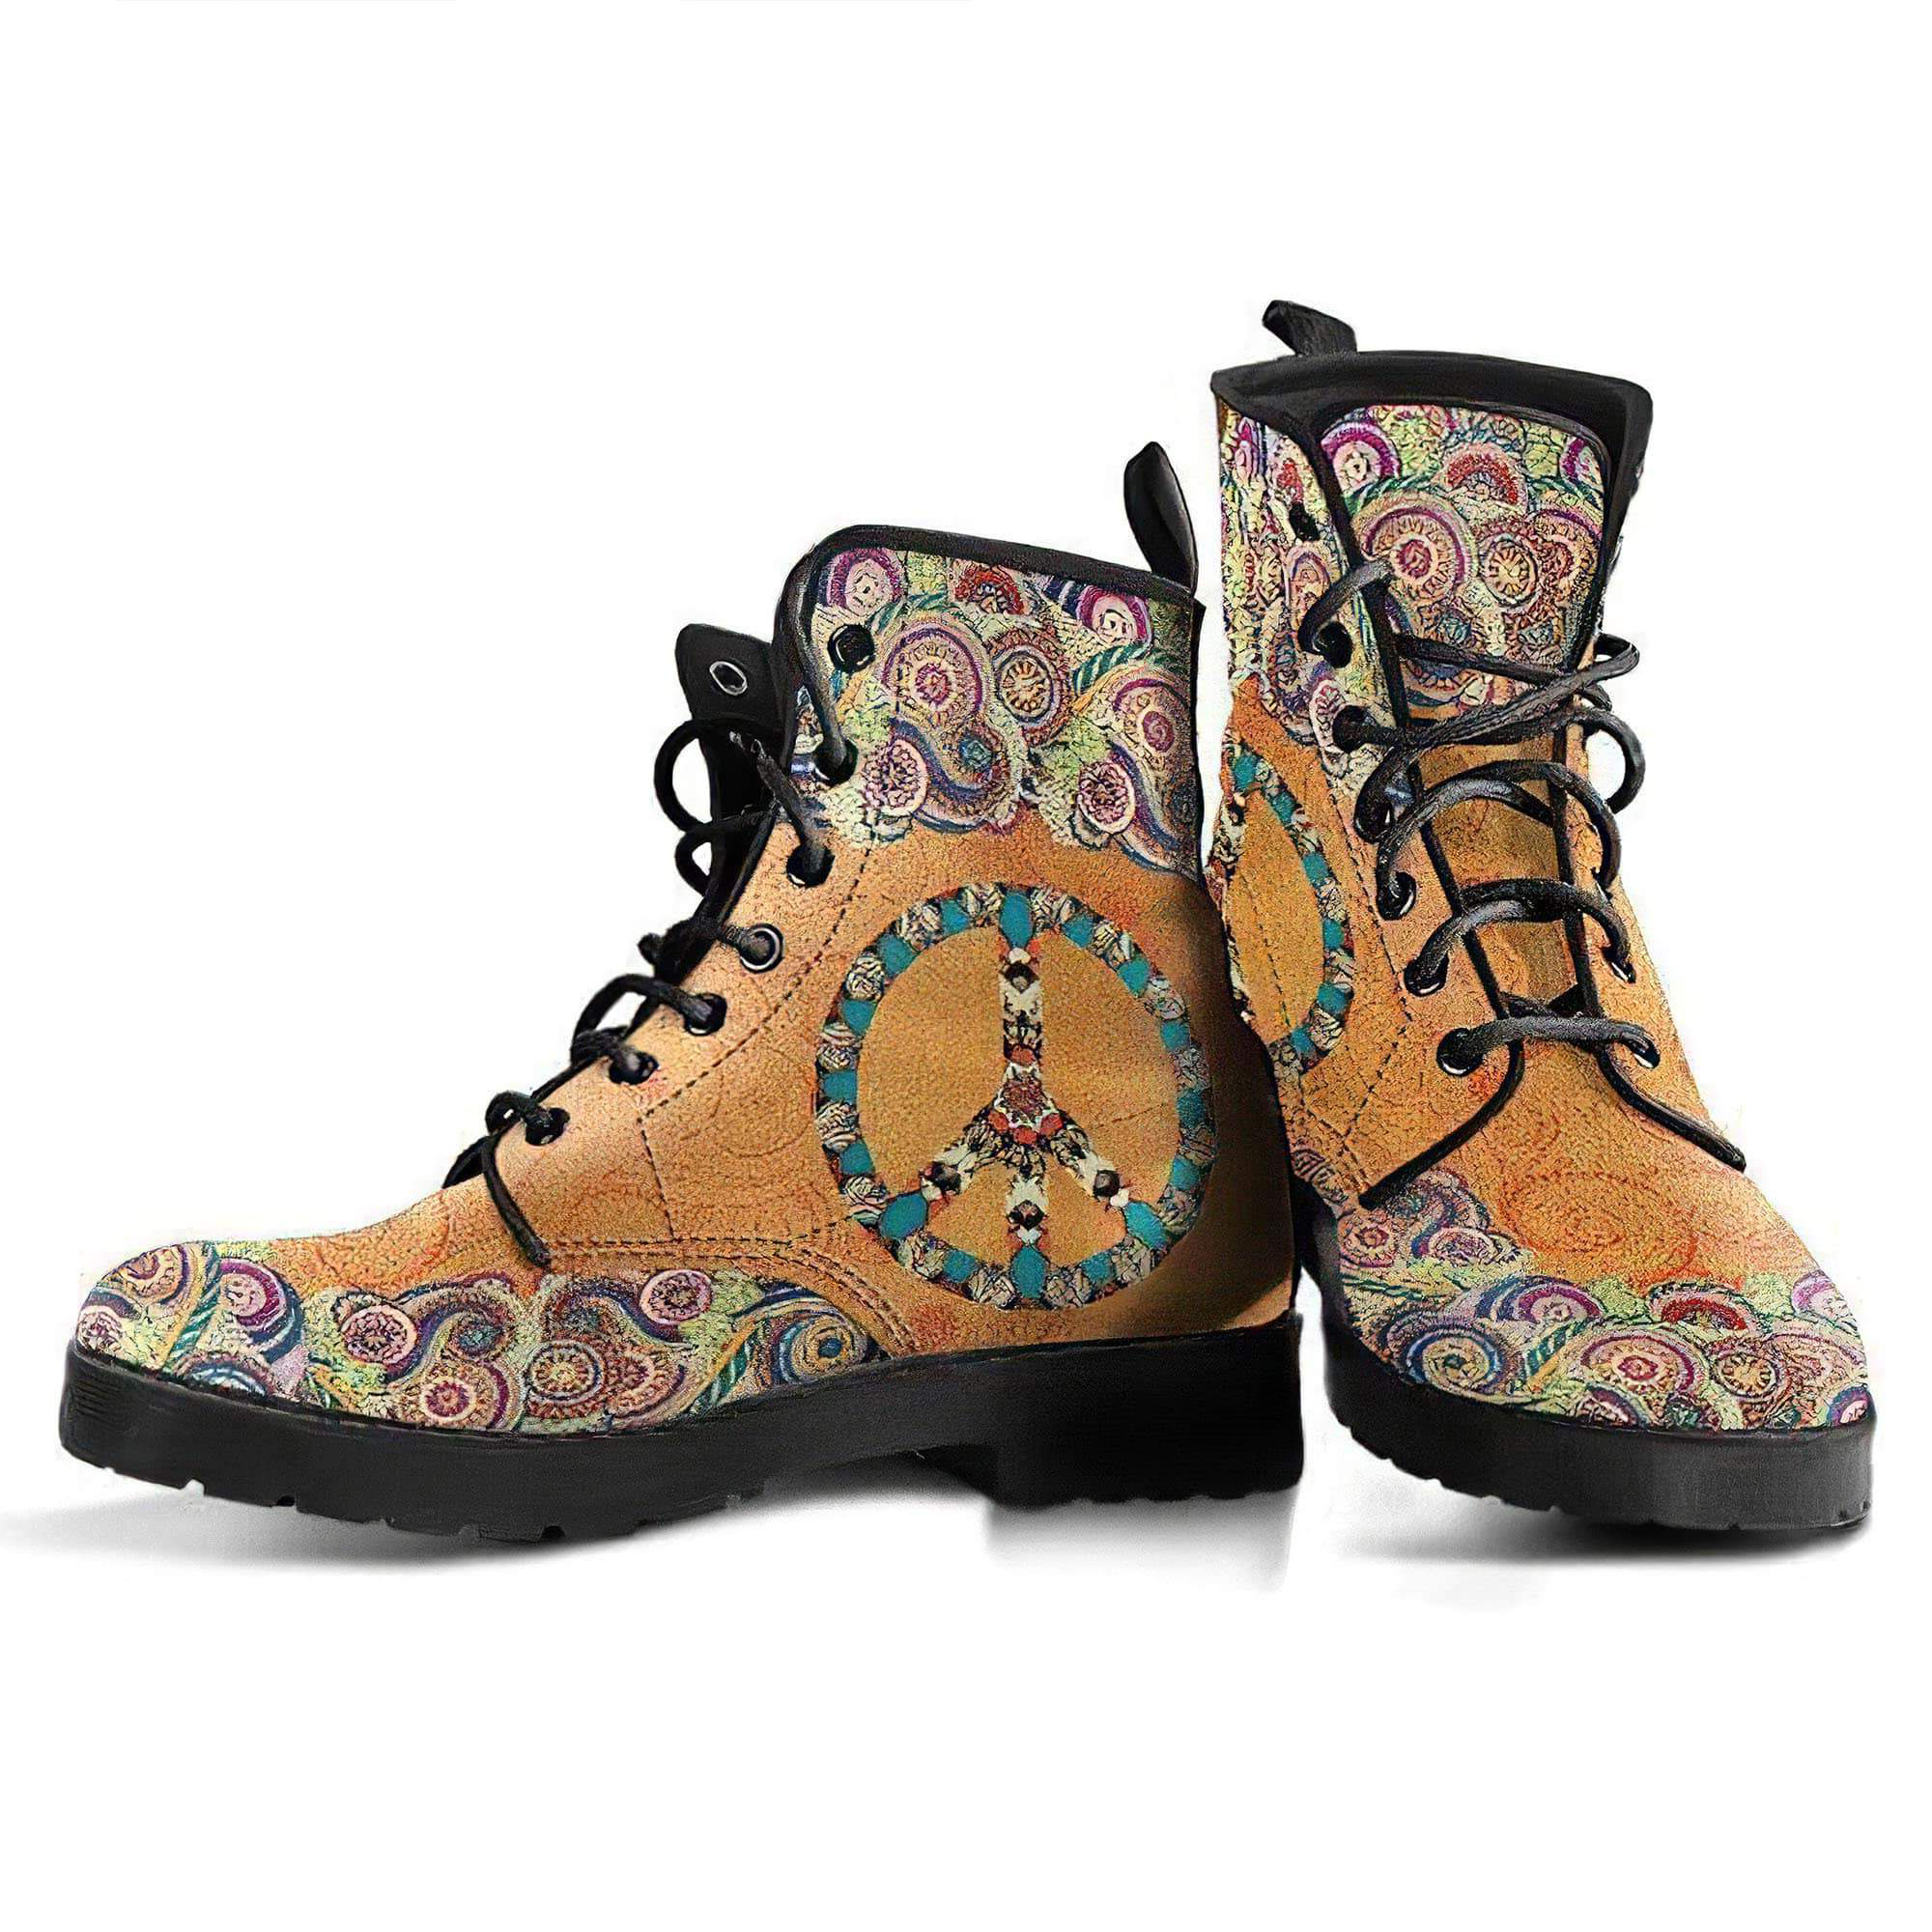 peace-mandala-brown-handcrafted-boots-women-s-leather-boots-12051927400509.jpg